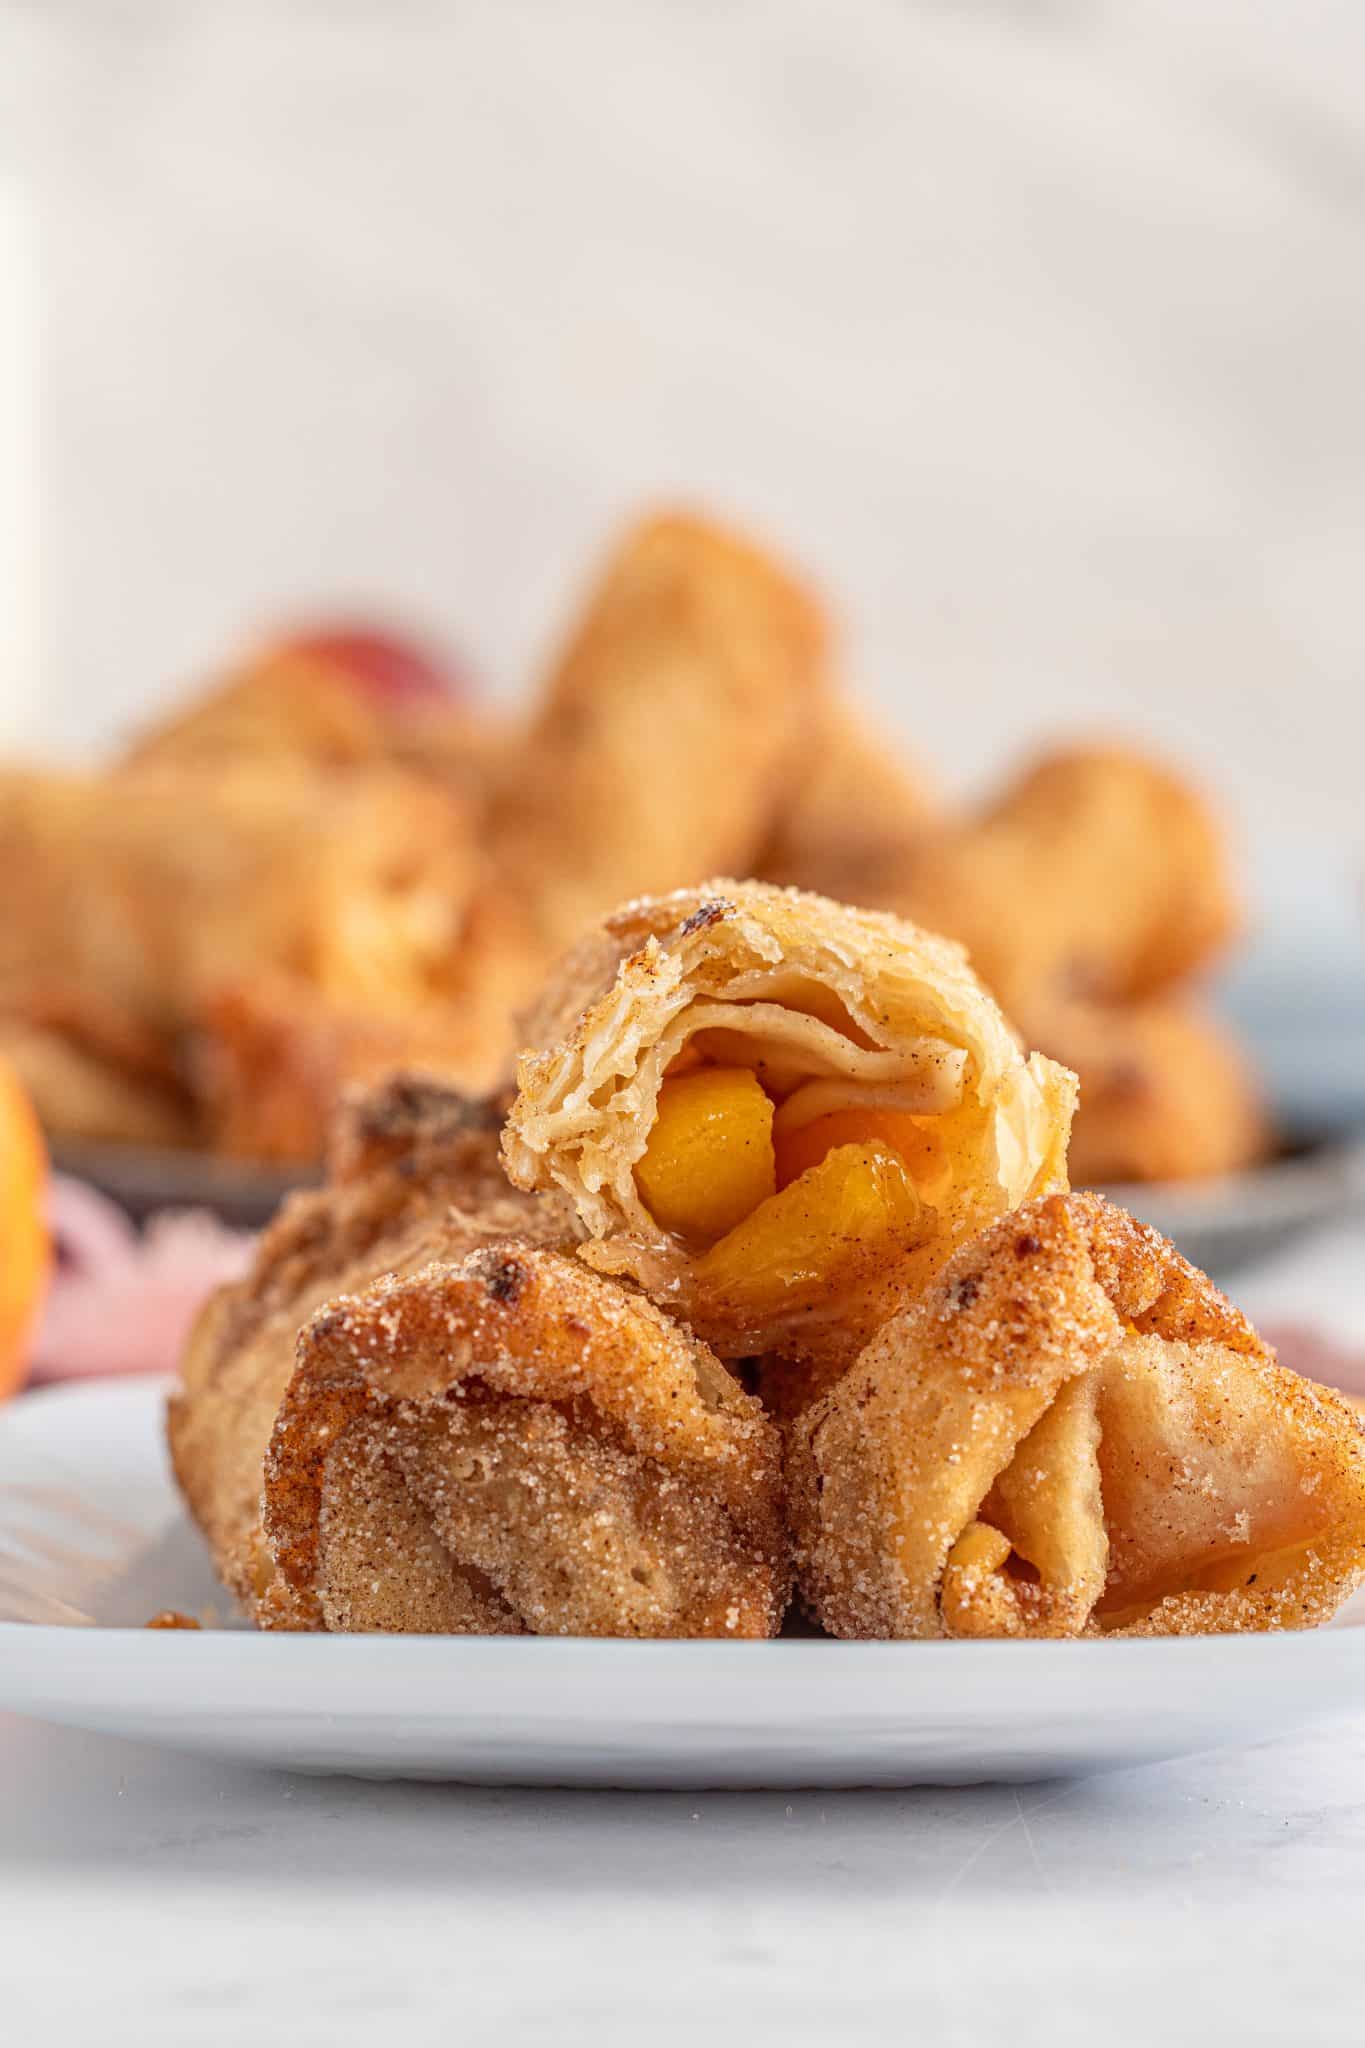 Side view of peach cobbler egg rolls with one egg roll cut in half so you can see the peaches inside the egg roll.